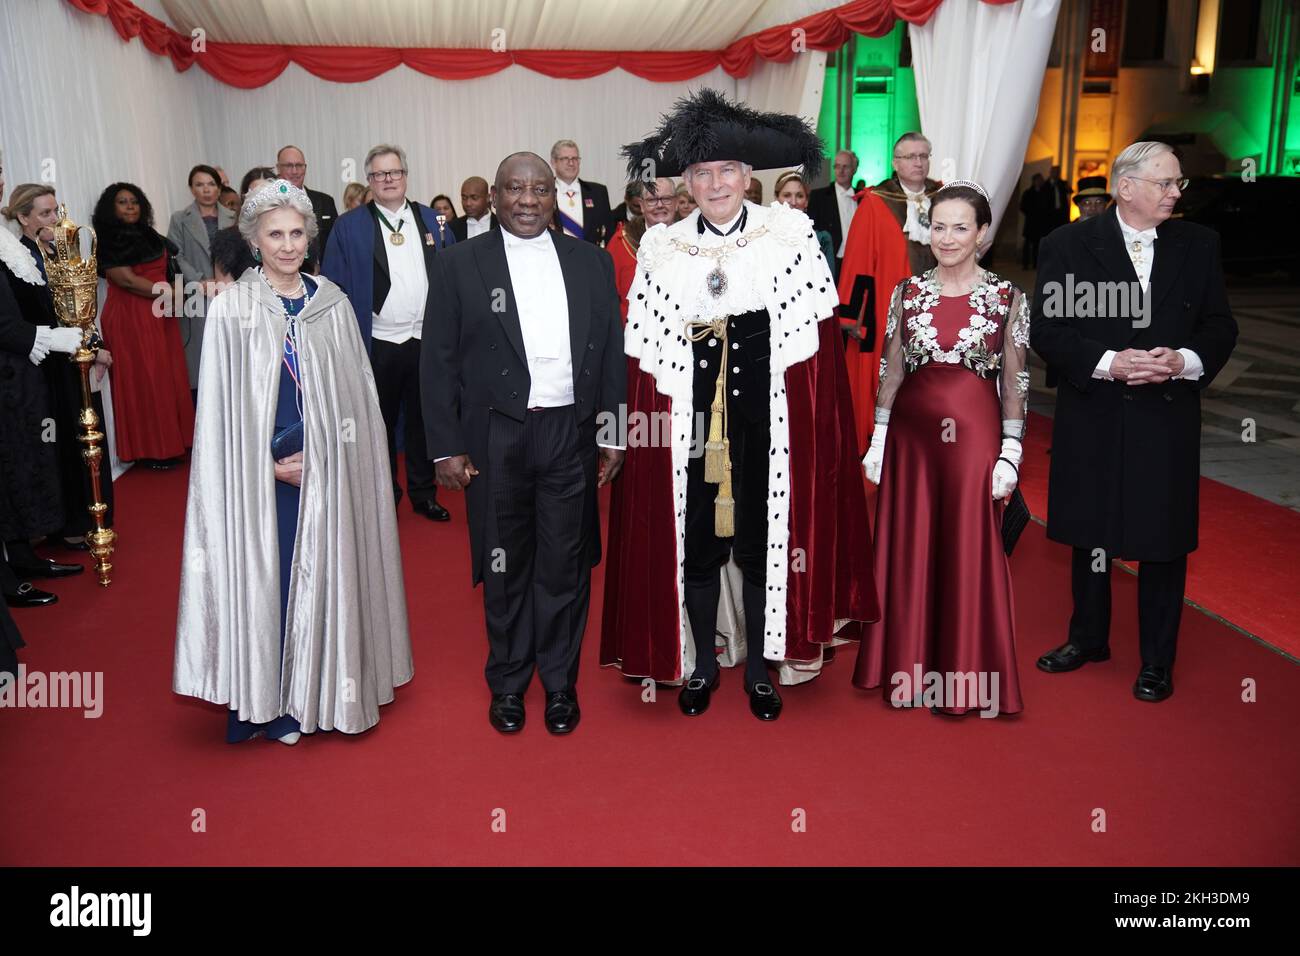 President Cyril Ramaphosa of South Africa, with the Duchess of Gloucester (left) the Lord Mayor of London, Nicholas Lyons, the Lady Mayoress of London, Felicity Lyons, and the Duke of Gloucester, attend a banquet at the Guildhall in London, given by the Lord Mayor and City of London Corporation, during his state visit to the UK. Picture date: Wednesday November 23, 2022. Stock Photo